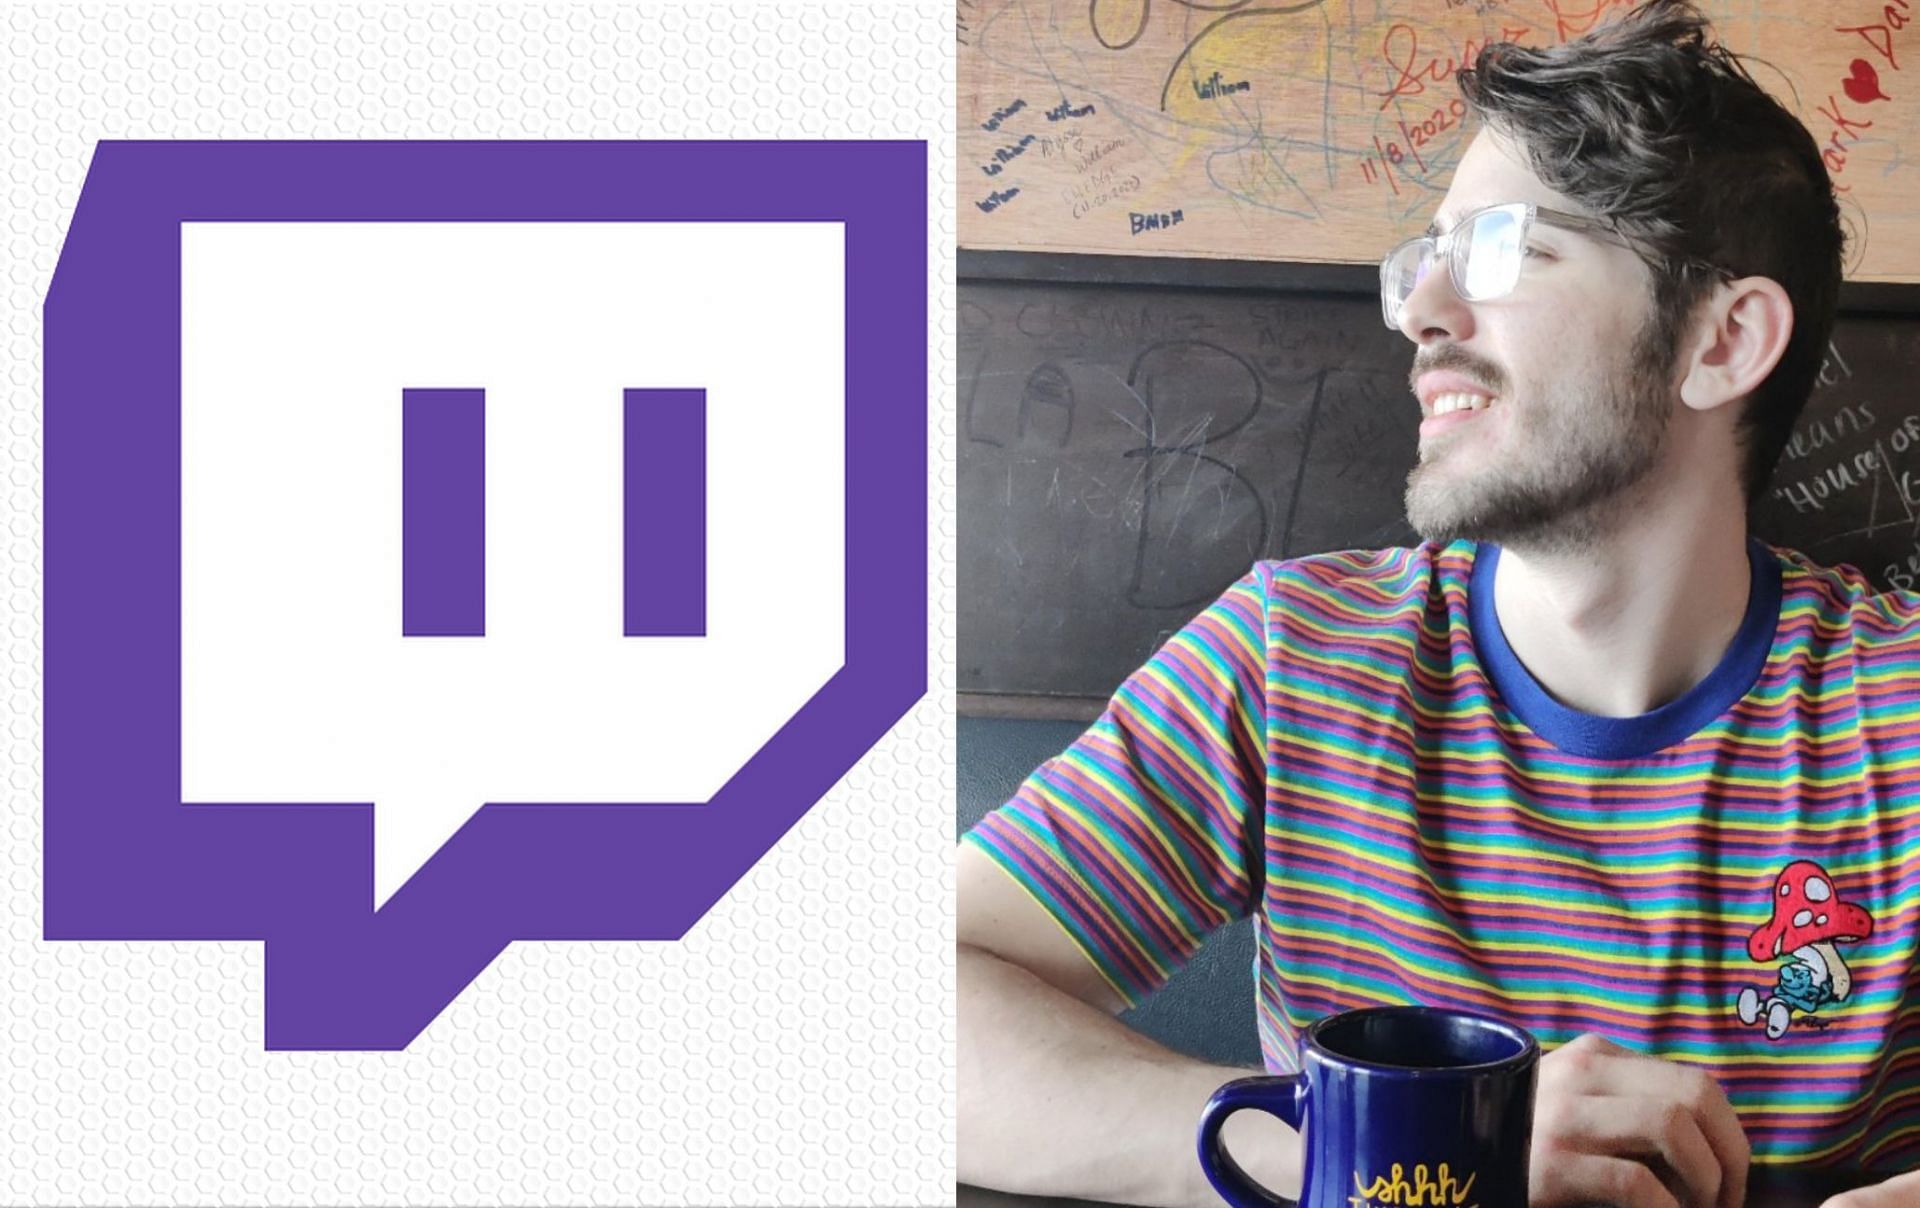 Twitch streamer and Overwatch professional player Gurululz was banned briefly on Twitch (Images via Guru/Twitch)